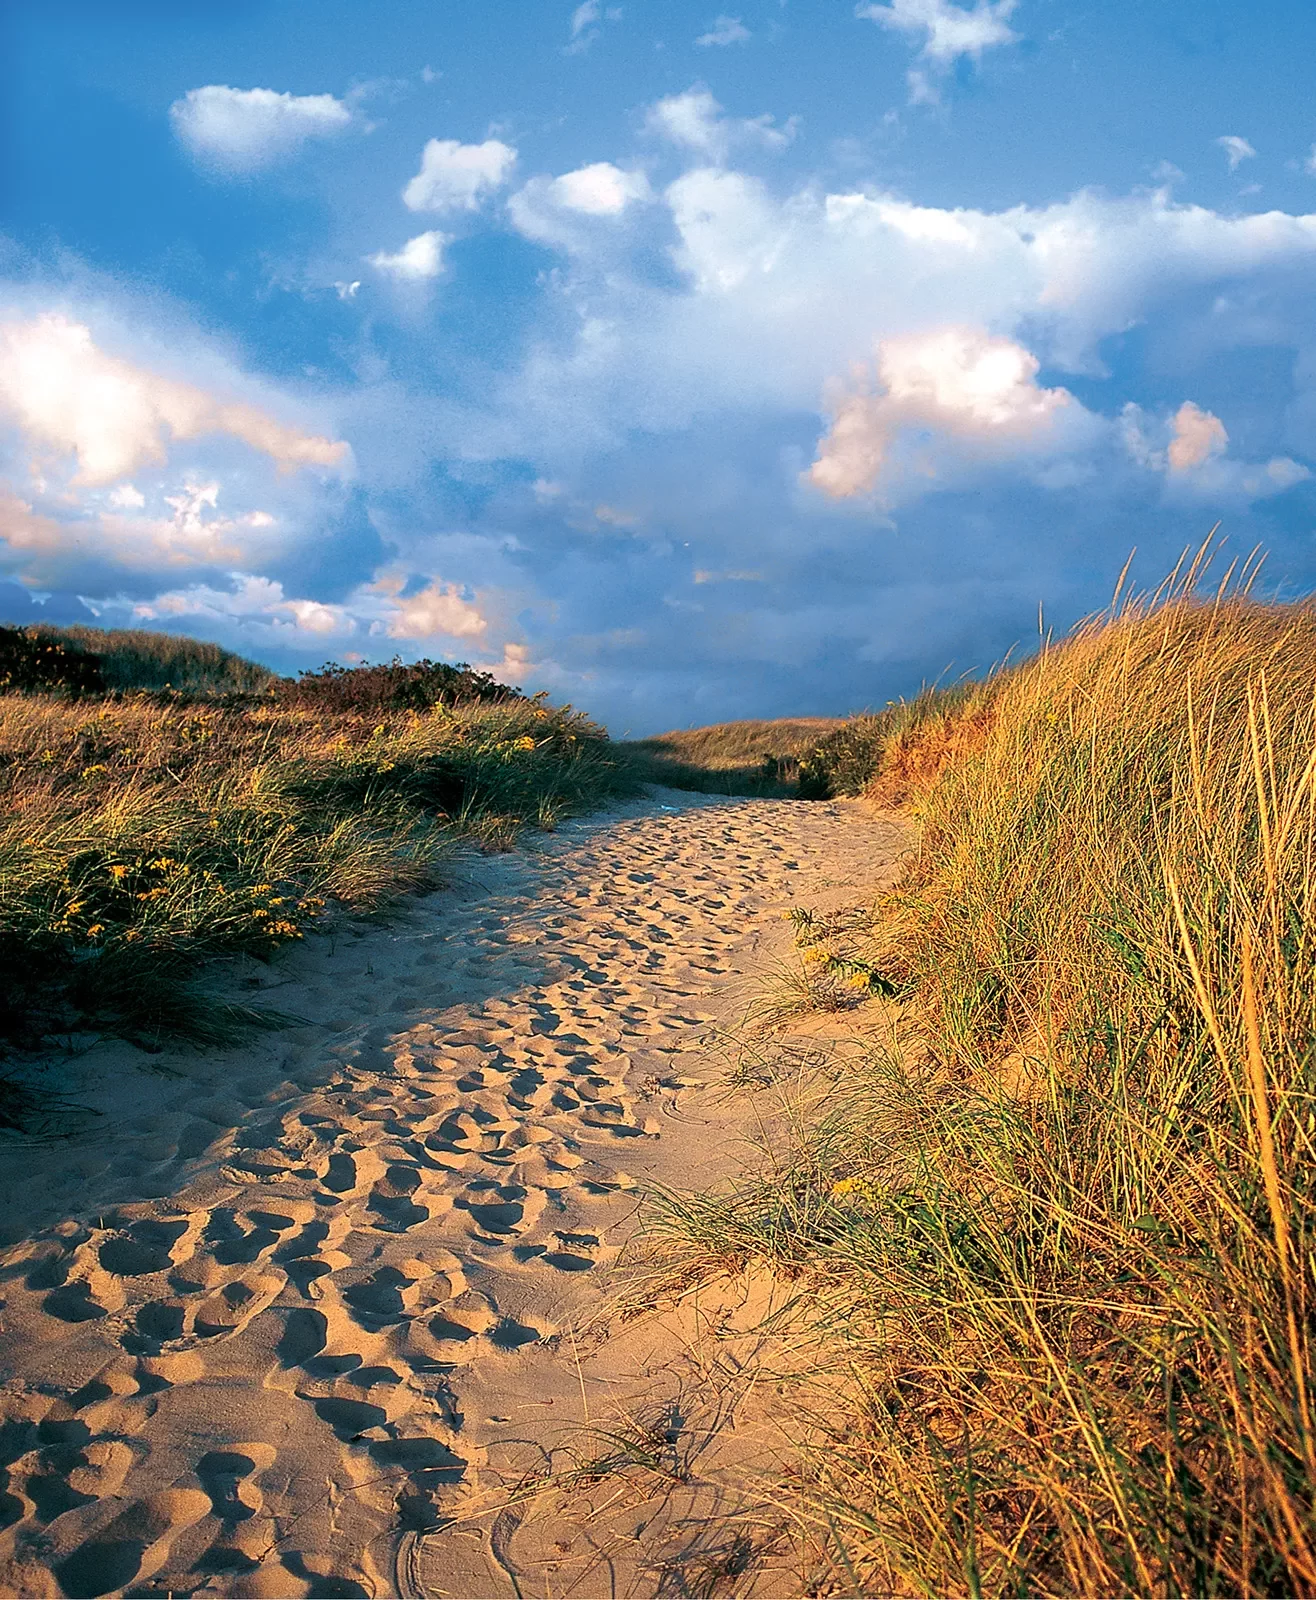 A sandy path between sand dunes with blue skies and clouds